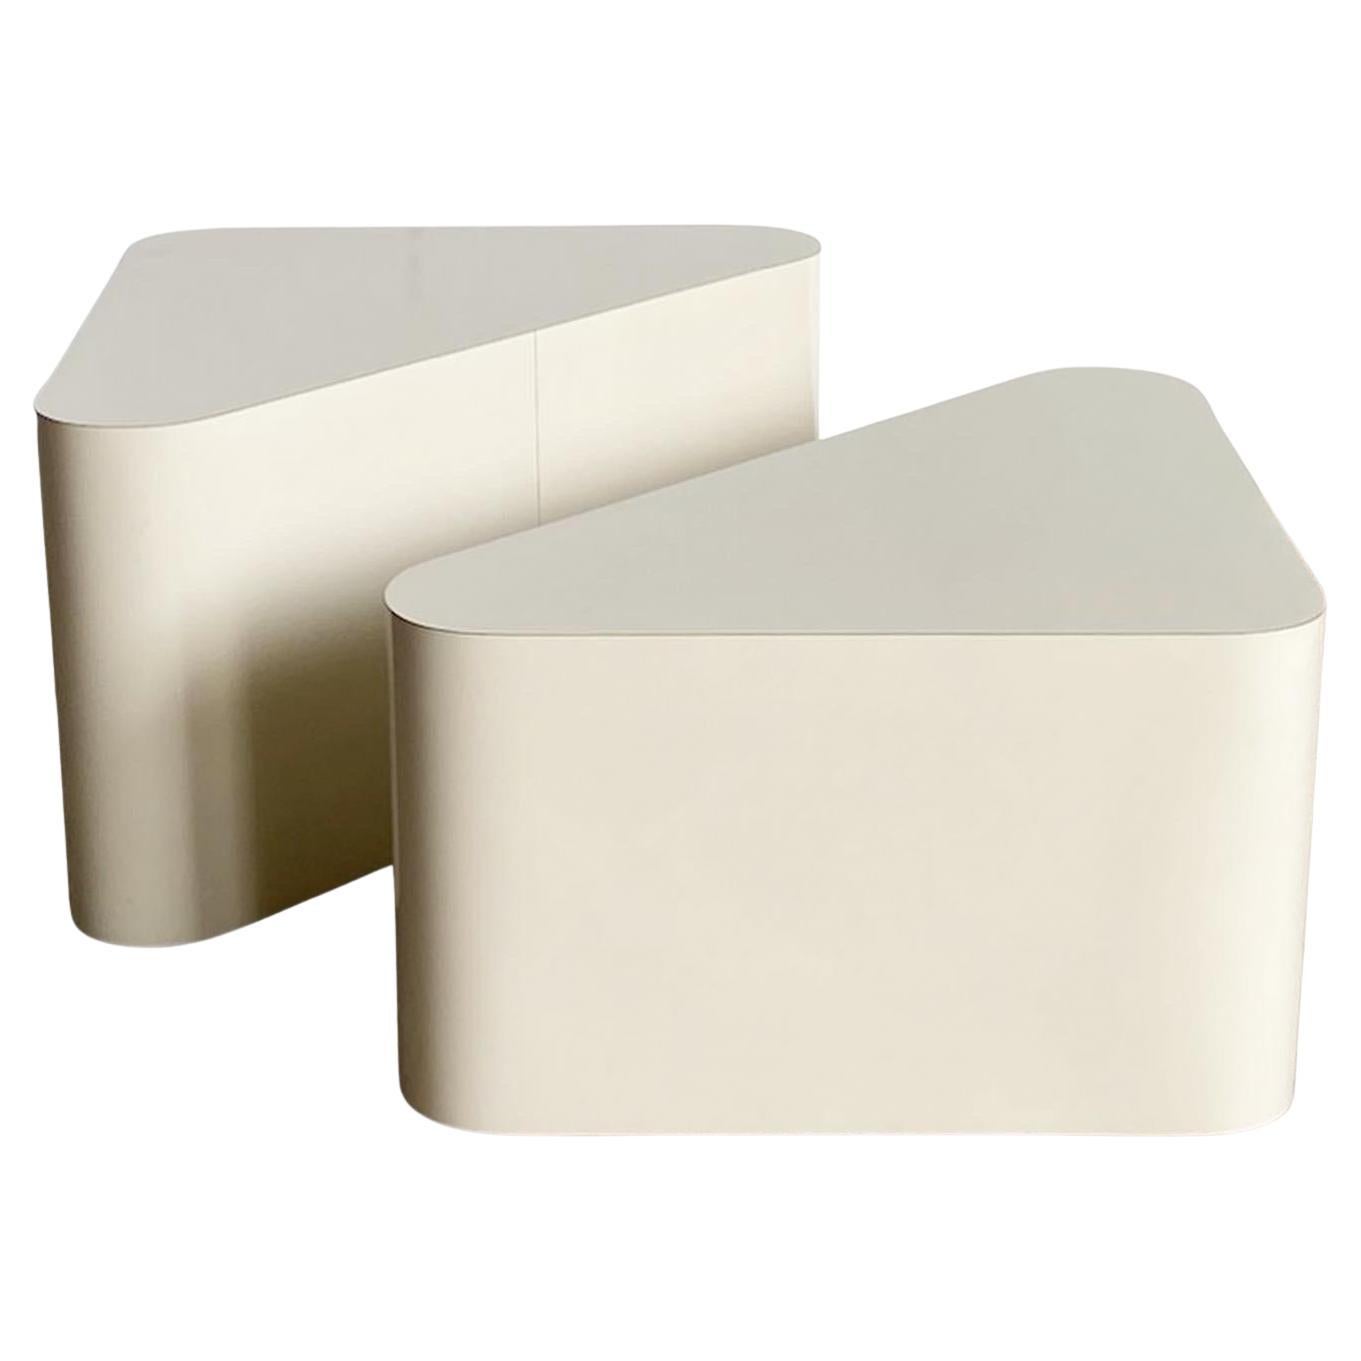 Postmodern Cream Lacquer Laminate Triangular Nesting Side Tables For Sale